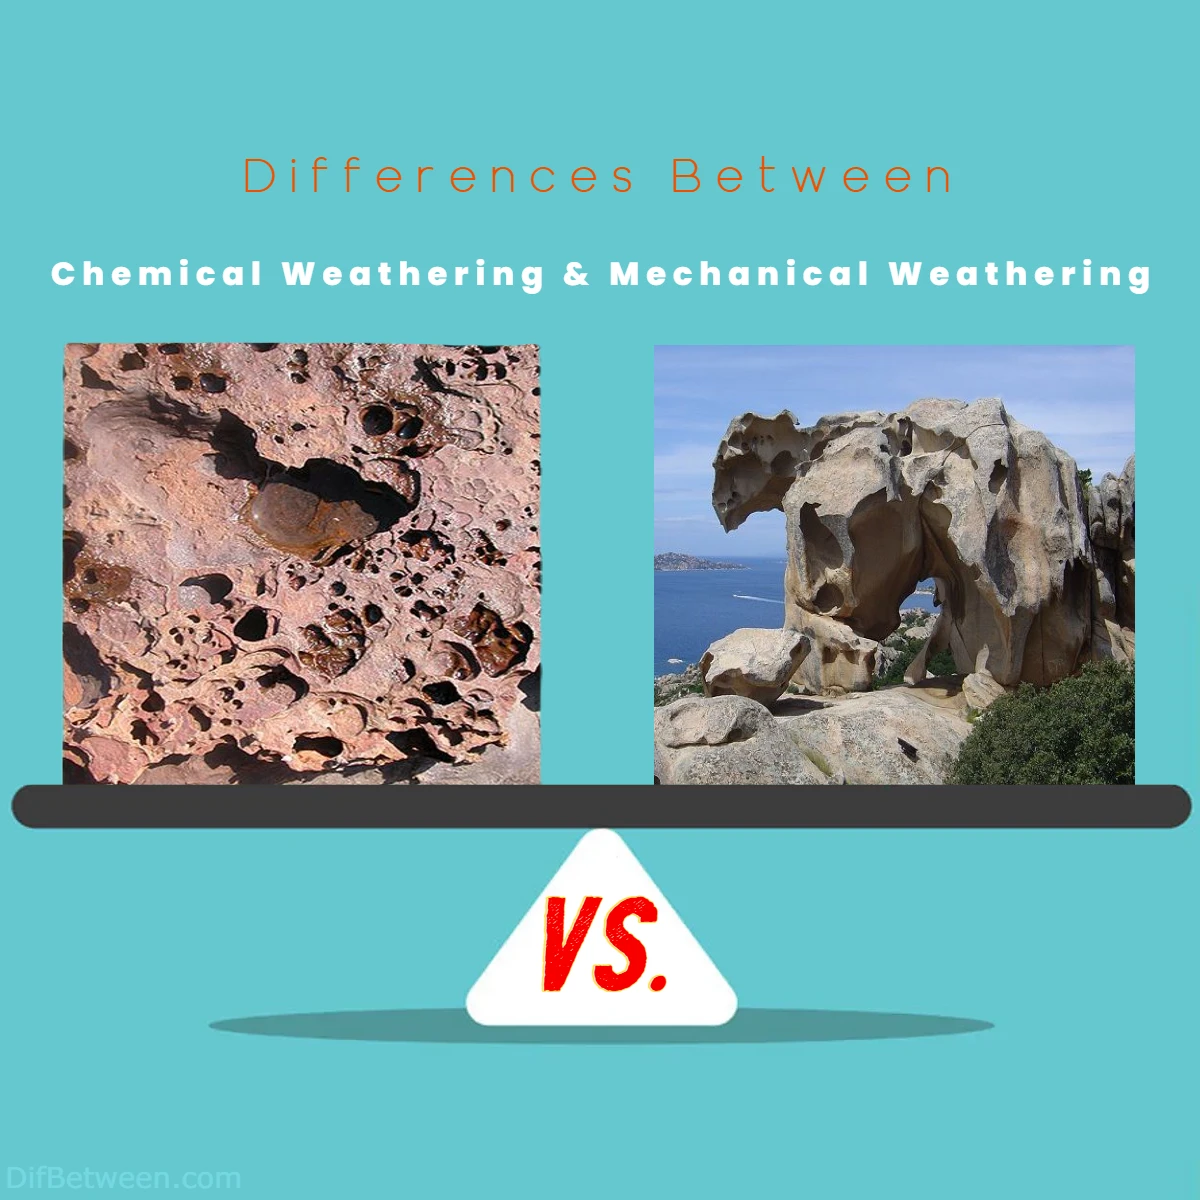 Differences Between Chemical Weathering vs Mechanical Weathering